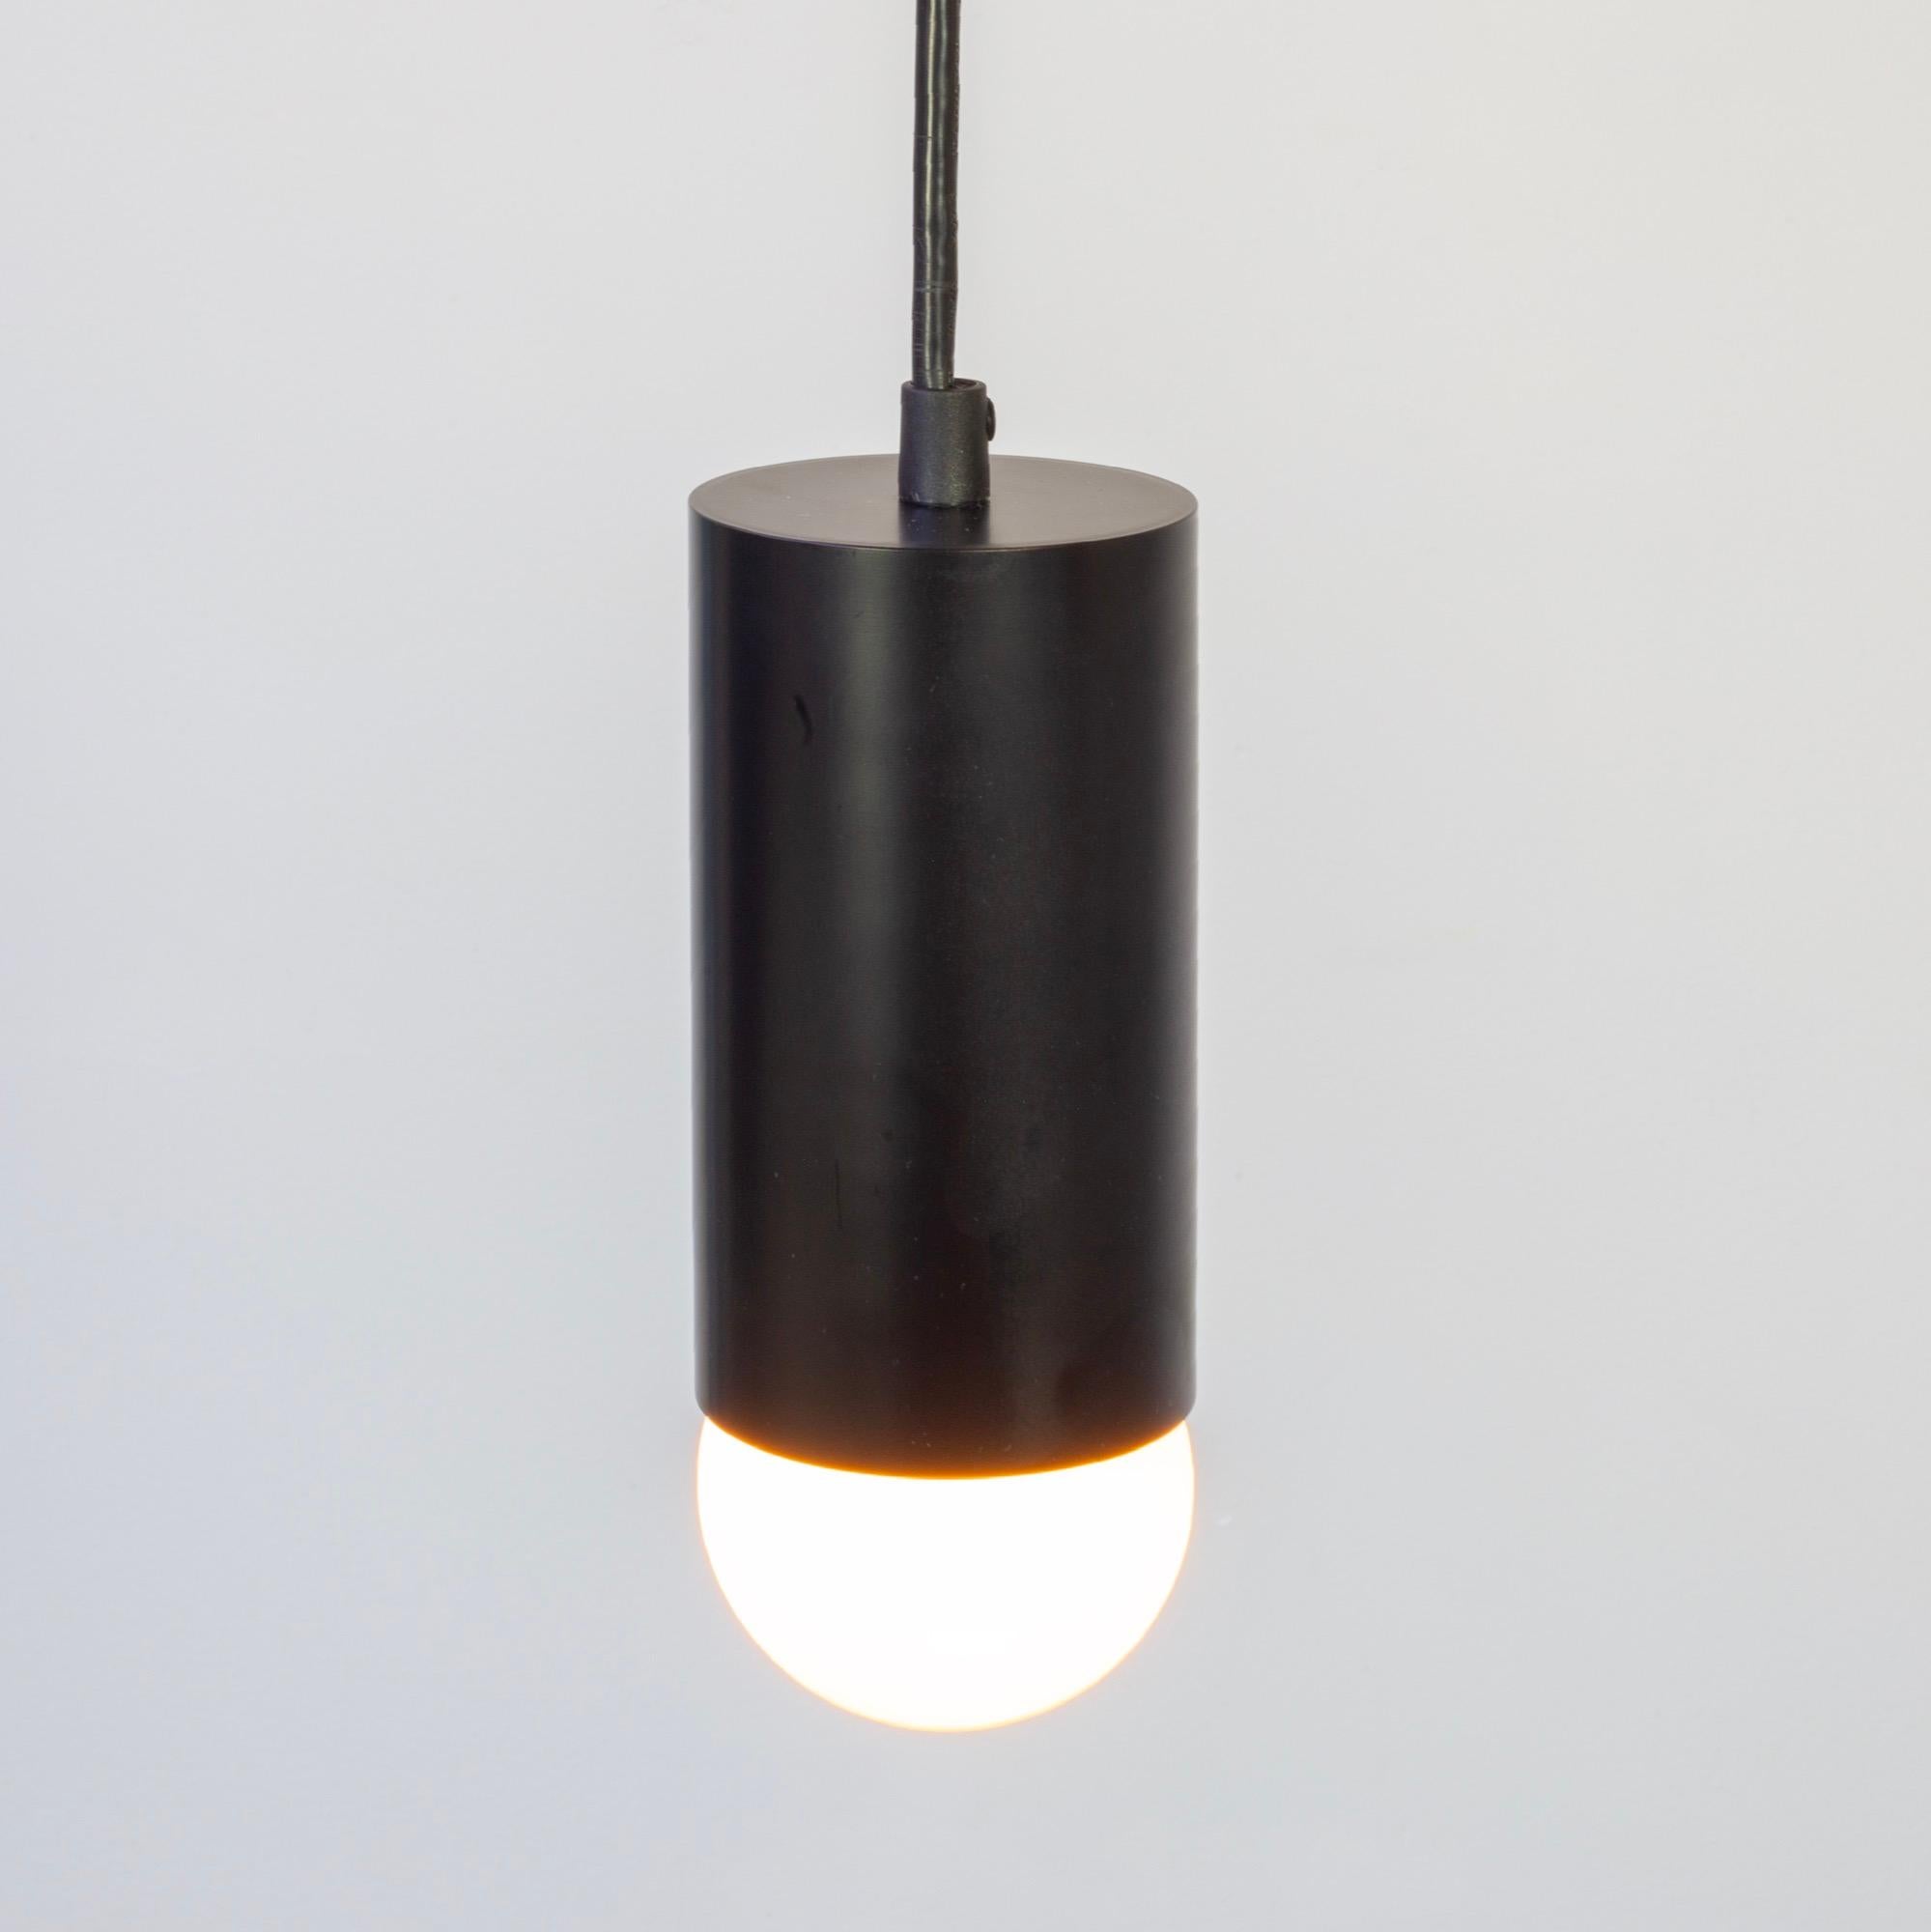 This listing is for 1x deep pendant in black designed and manufactured by RESEARCH Lighting.

Materials: Steel
Finish: Powder Coated Steel in black
Electronics: 1x E26 Socket, G25 Bulb (included)
Suspension: 5